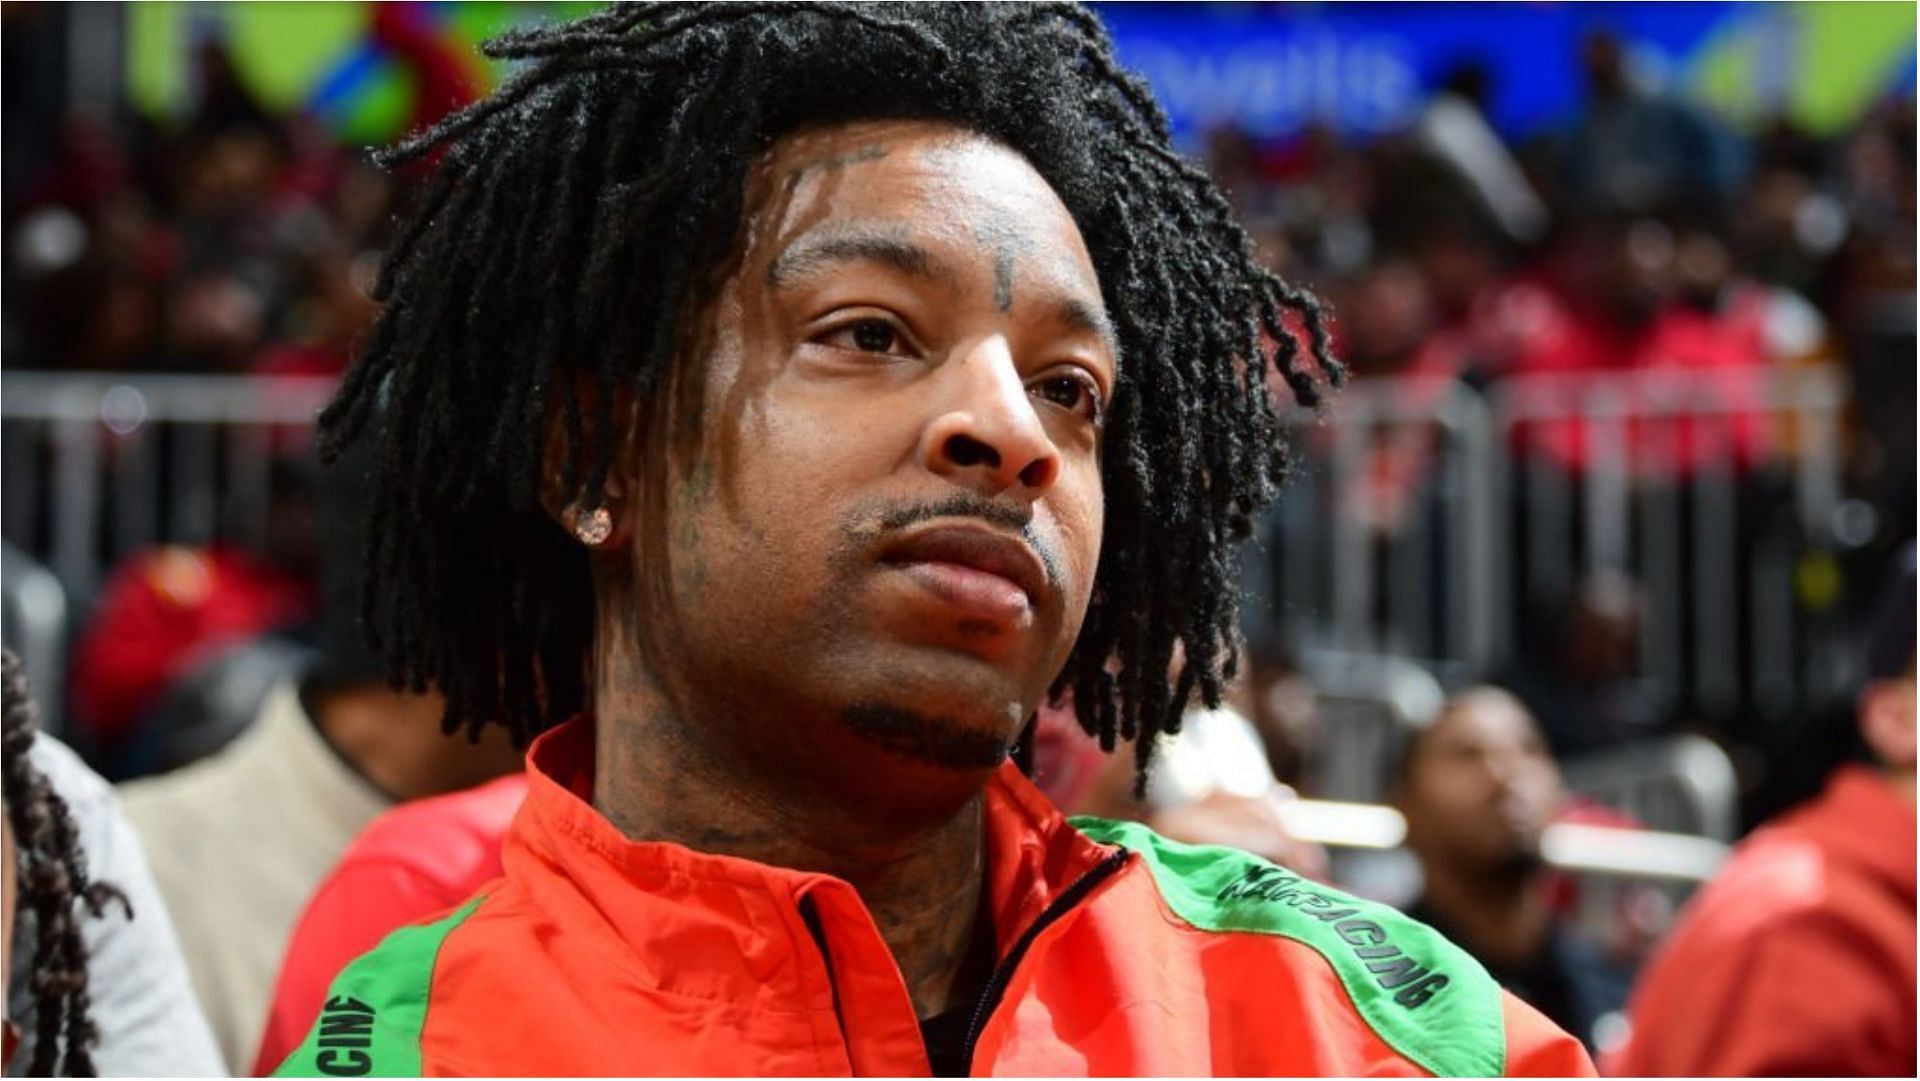 21 Savage was honored by Georgia State Representative by naming a day under his name (Image via Scott Cunningham/Getty Images)